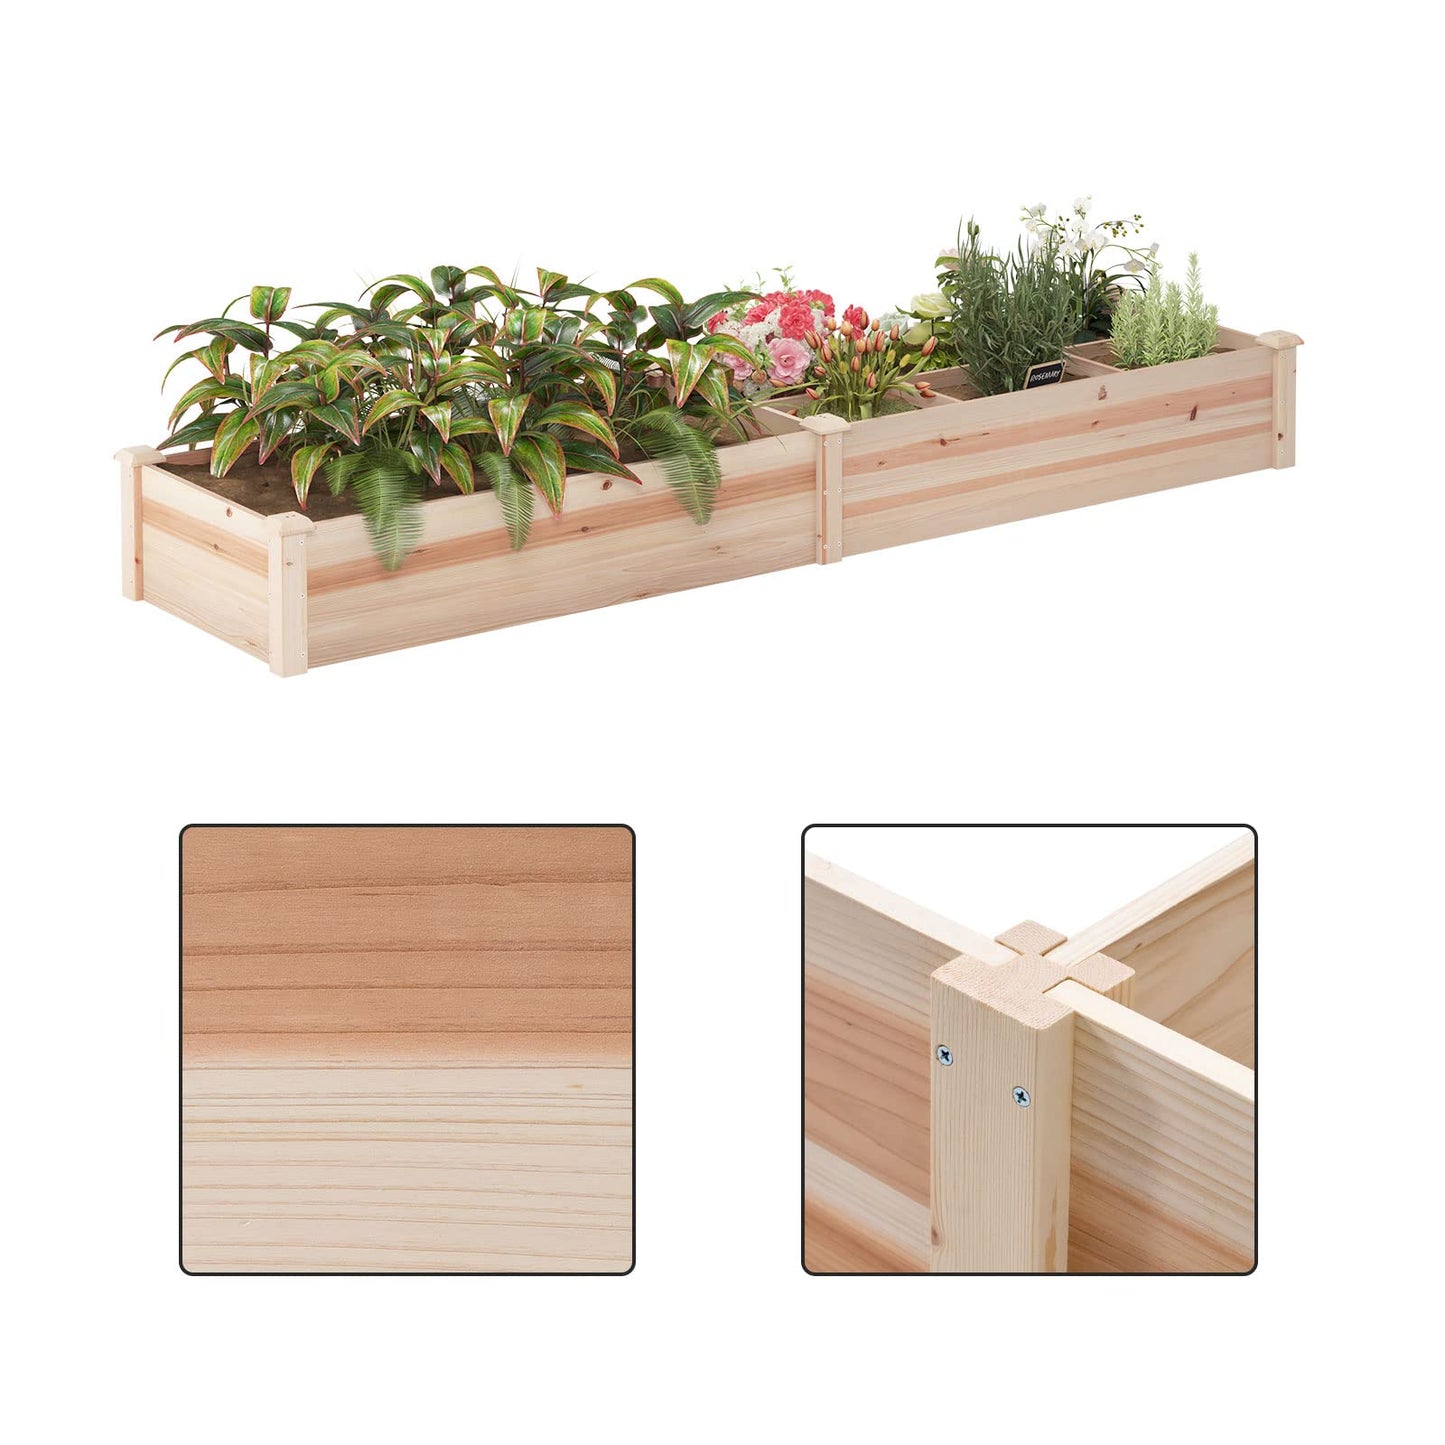 SogesHome Outdoor Wooden Plant Raised Bed, Garden Plant Grow Kit 91.5"x 24"x 10.4" , Elevated Planter Box with Divider Wood Planting Bed for Vegetables, Flowers, Herb